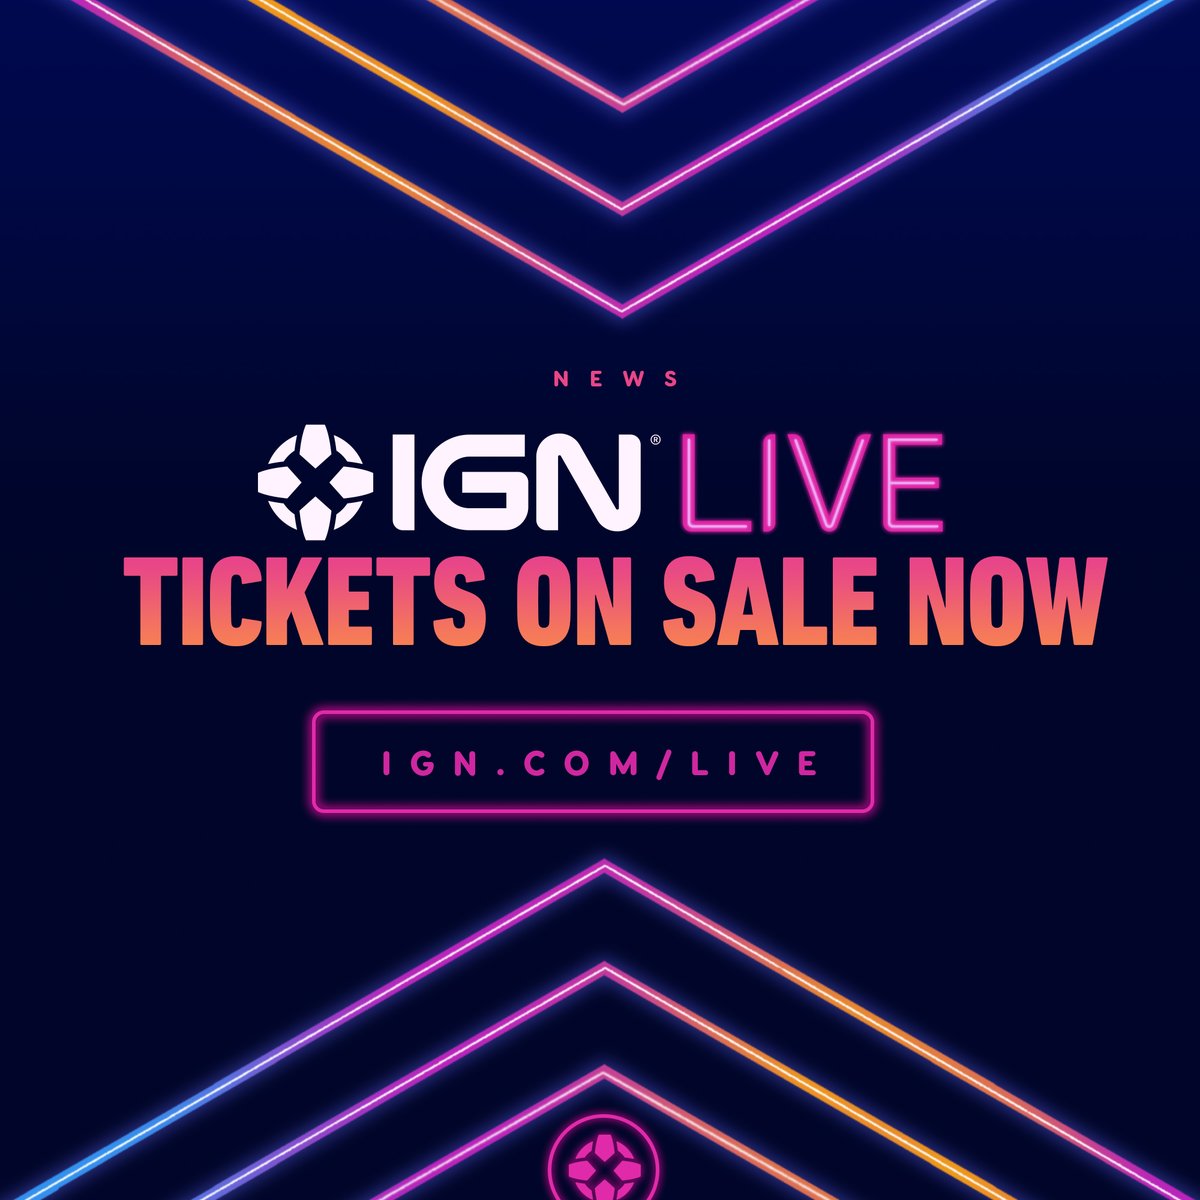 Join us for a 3-day live show celebrating all things gaming and entertainment in L.A. from June 7-9! Get your single-day and 3-day tickets here: bit.ly/3WbFtfF